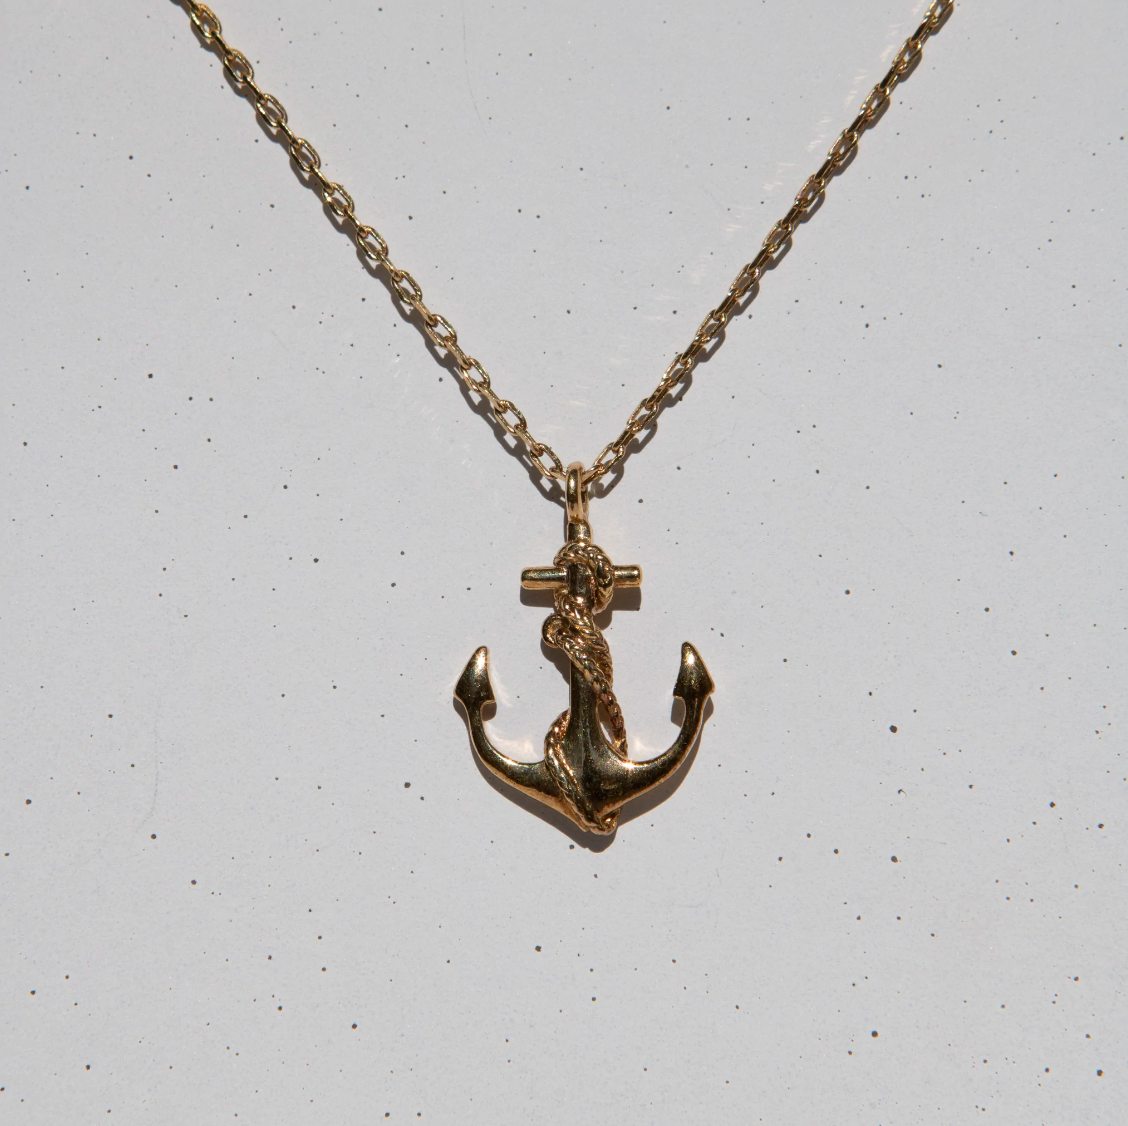 gold anchor shaped pendant necklace on grey speckled background